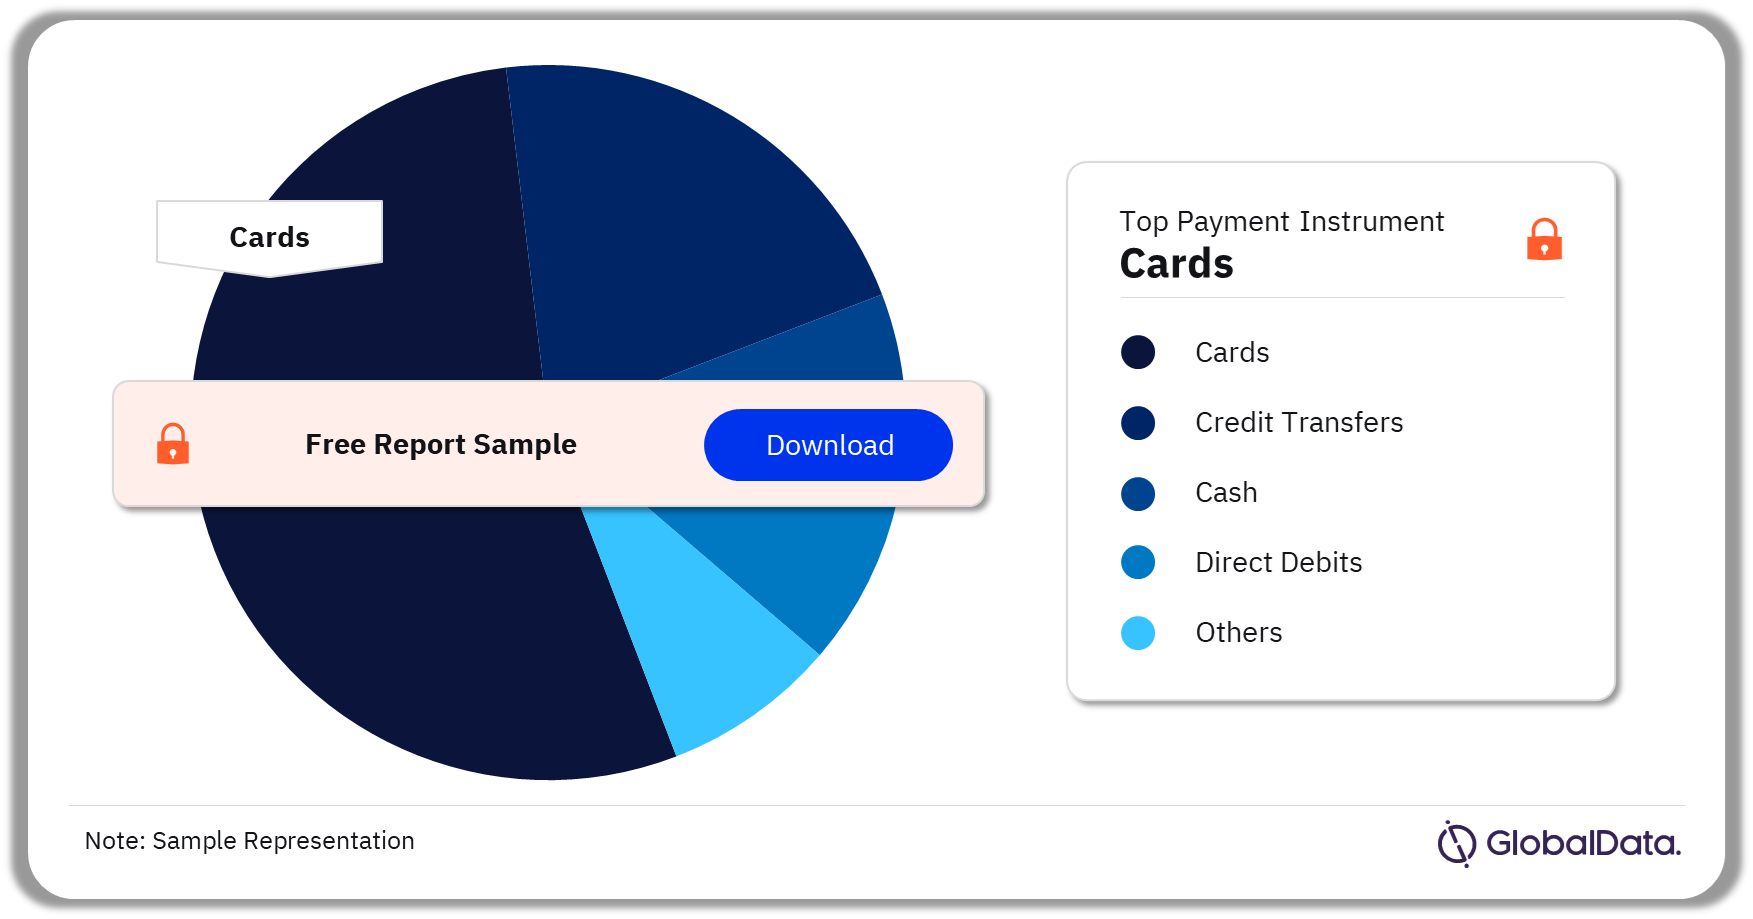 UK Cards and Payments Market Analysis by Payment Instruments (Volume Terms), 2023 (%)